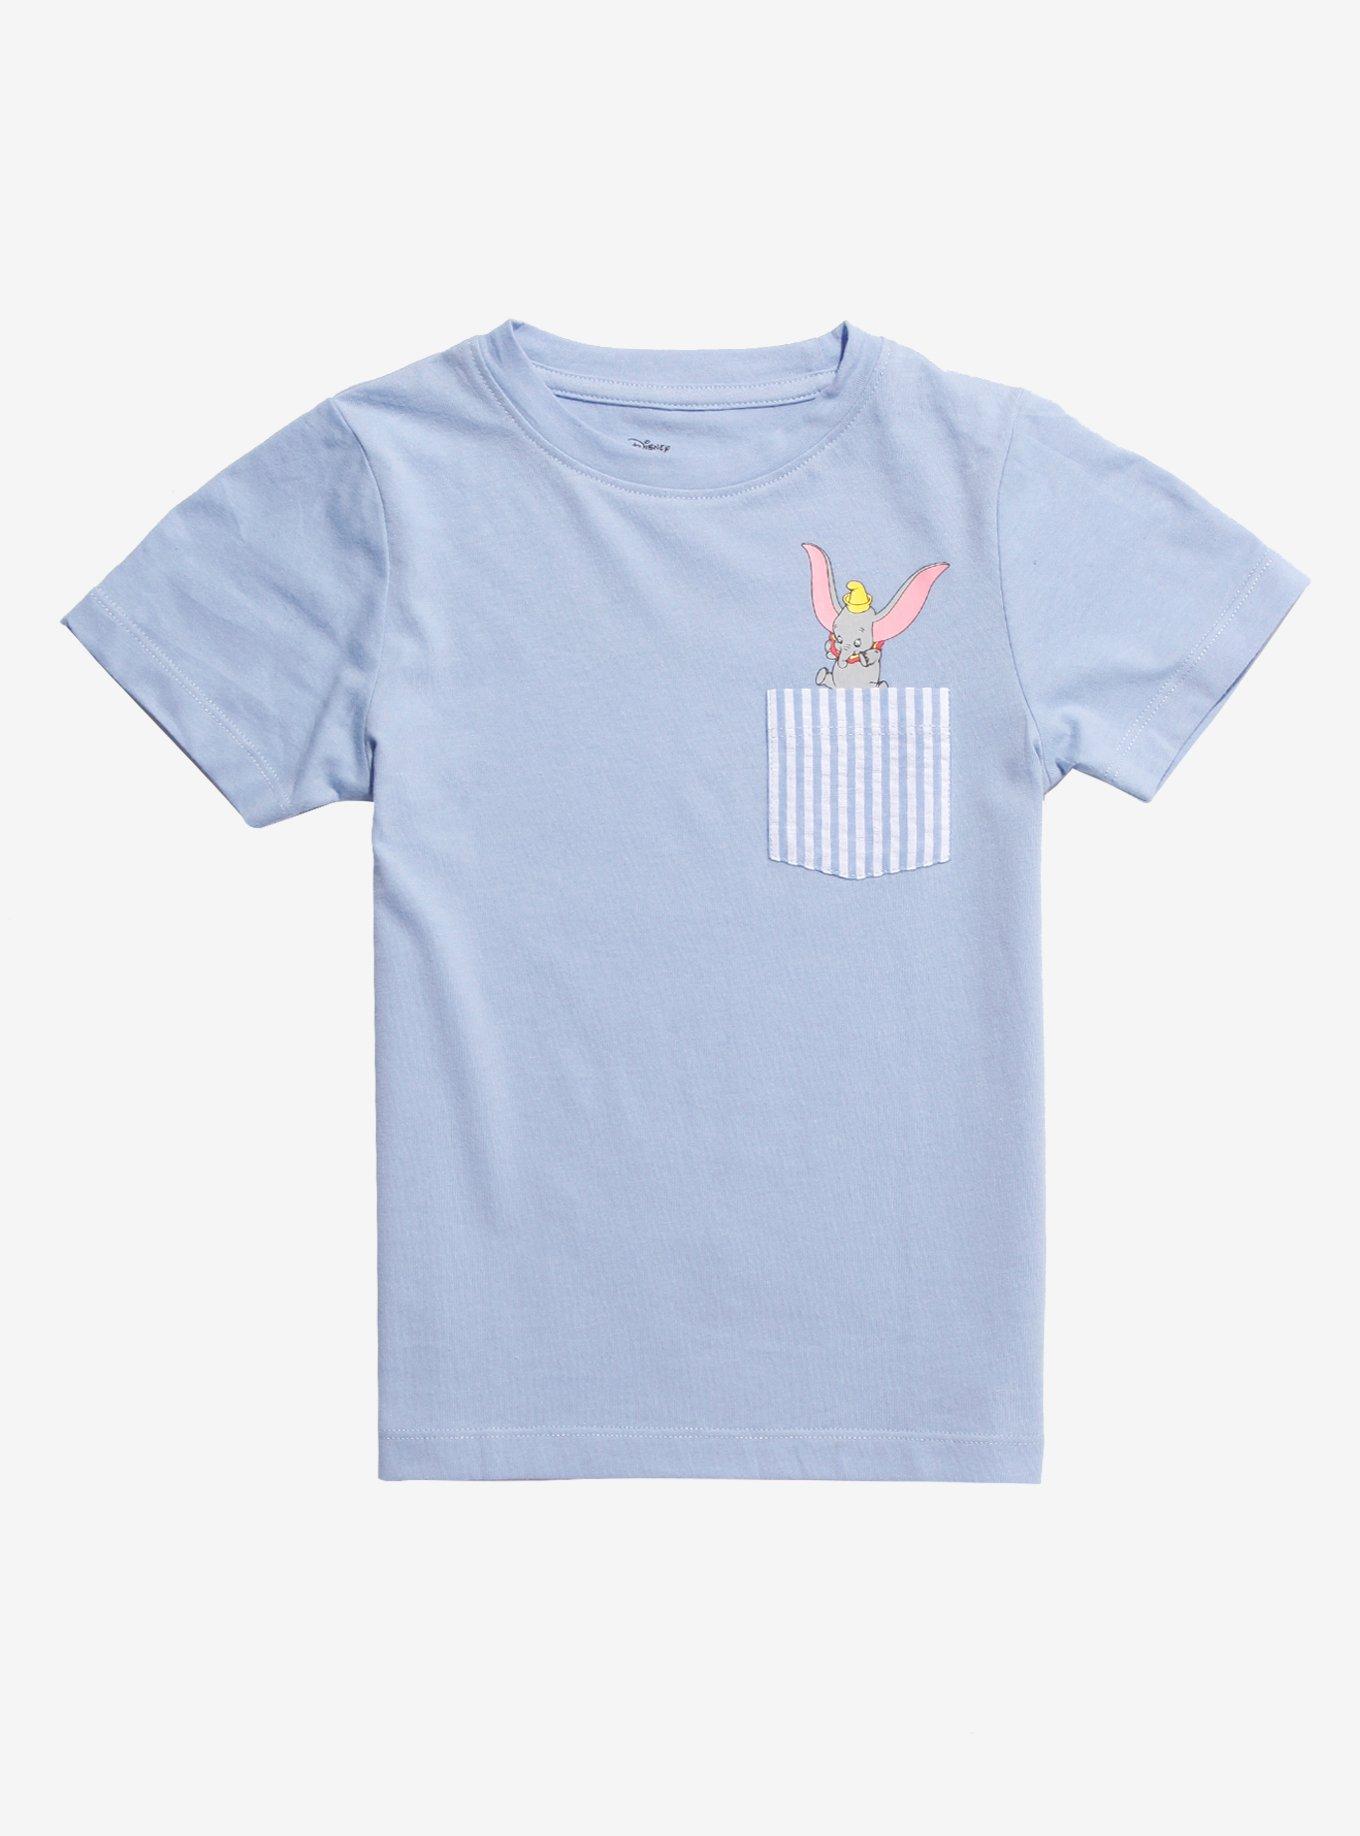 Disney Dumbo Striped Pocket Toddler T-Shirt - BoxLunch Exclusive, BLUE, hi-res